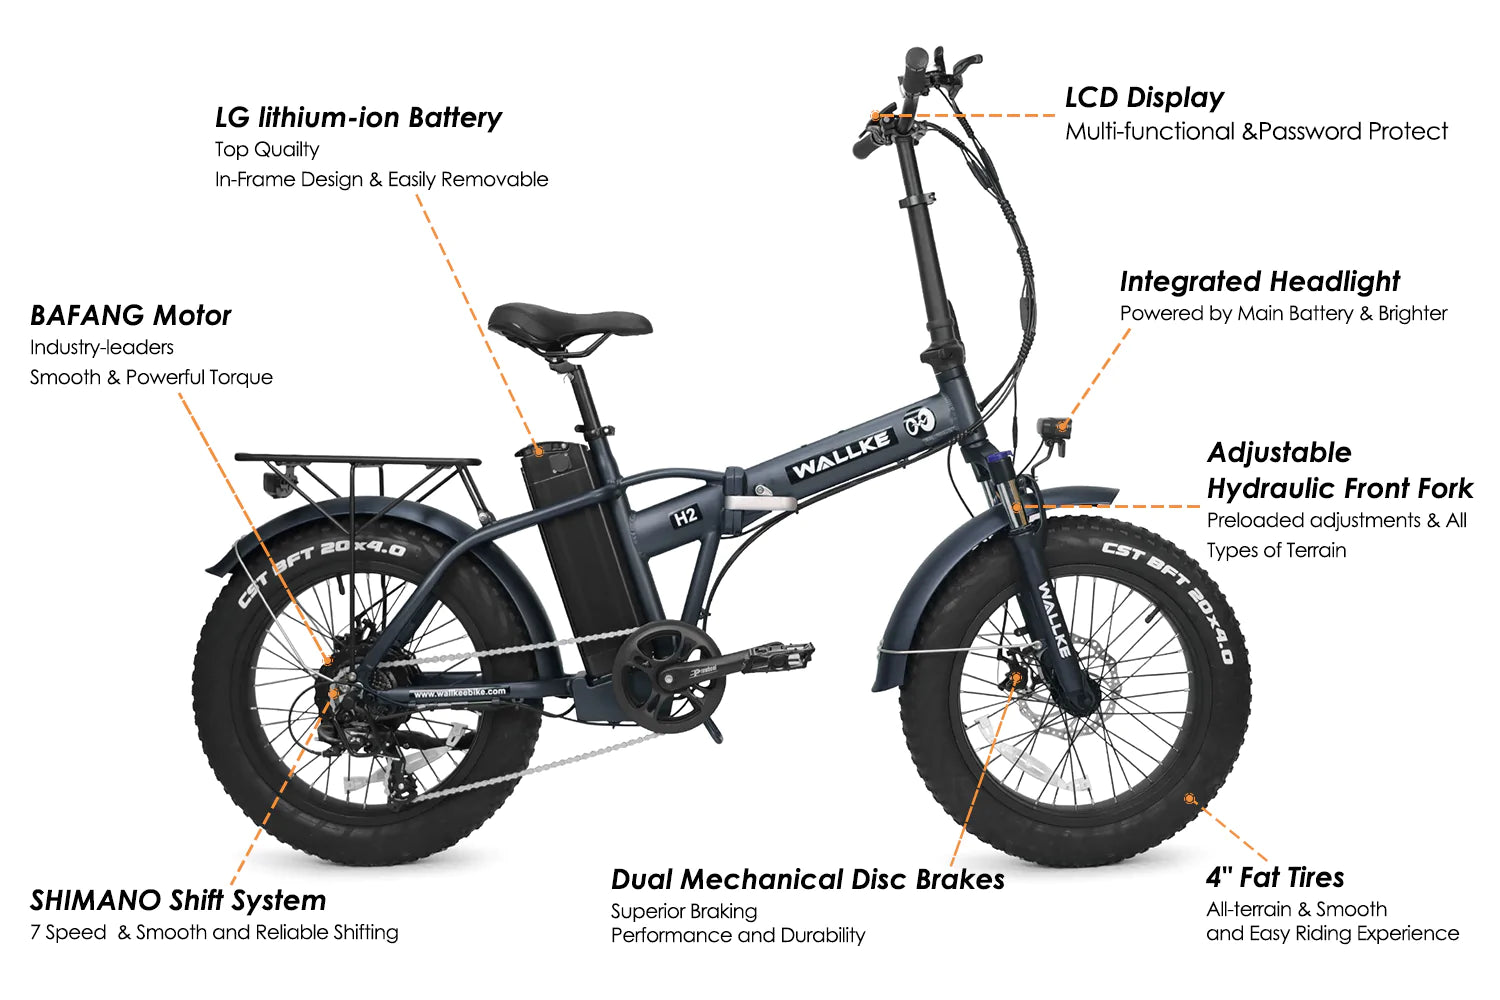 Where can I buy the affordable electric bicycle?